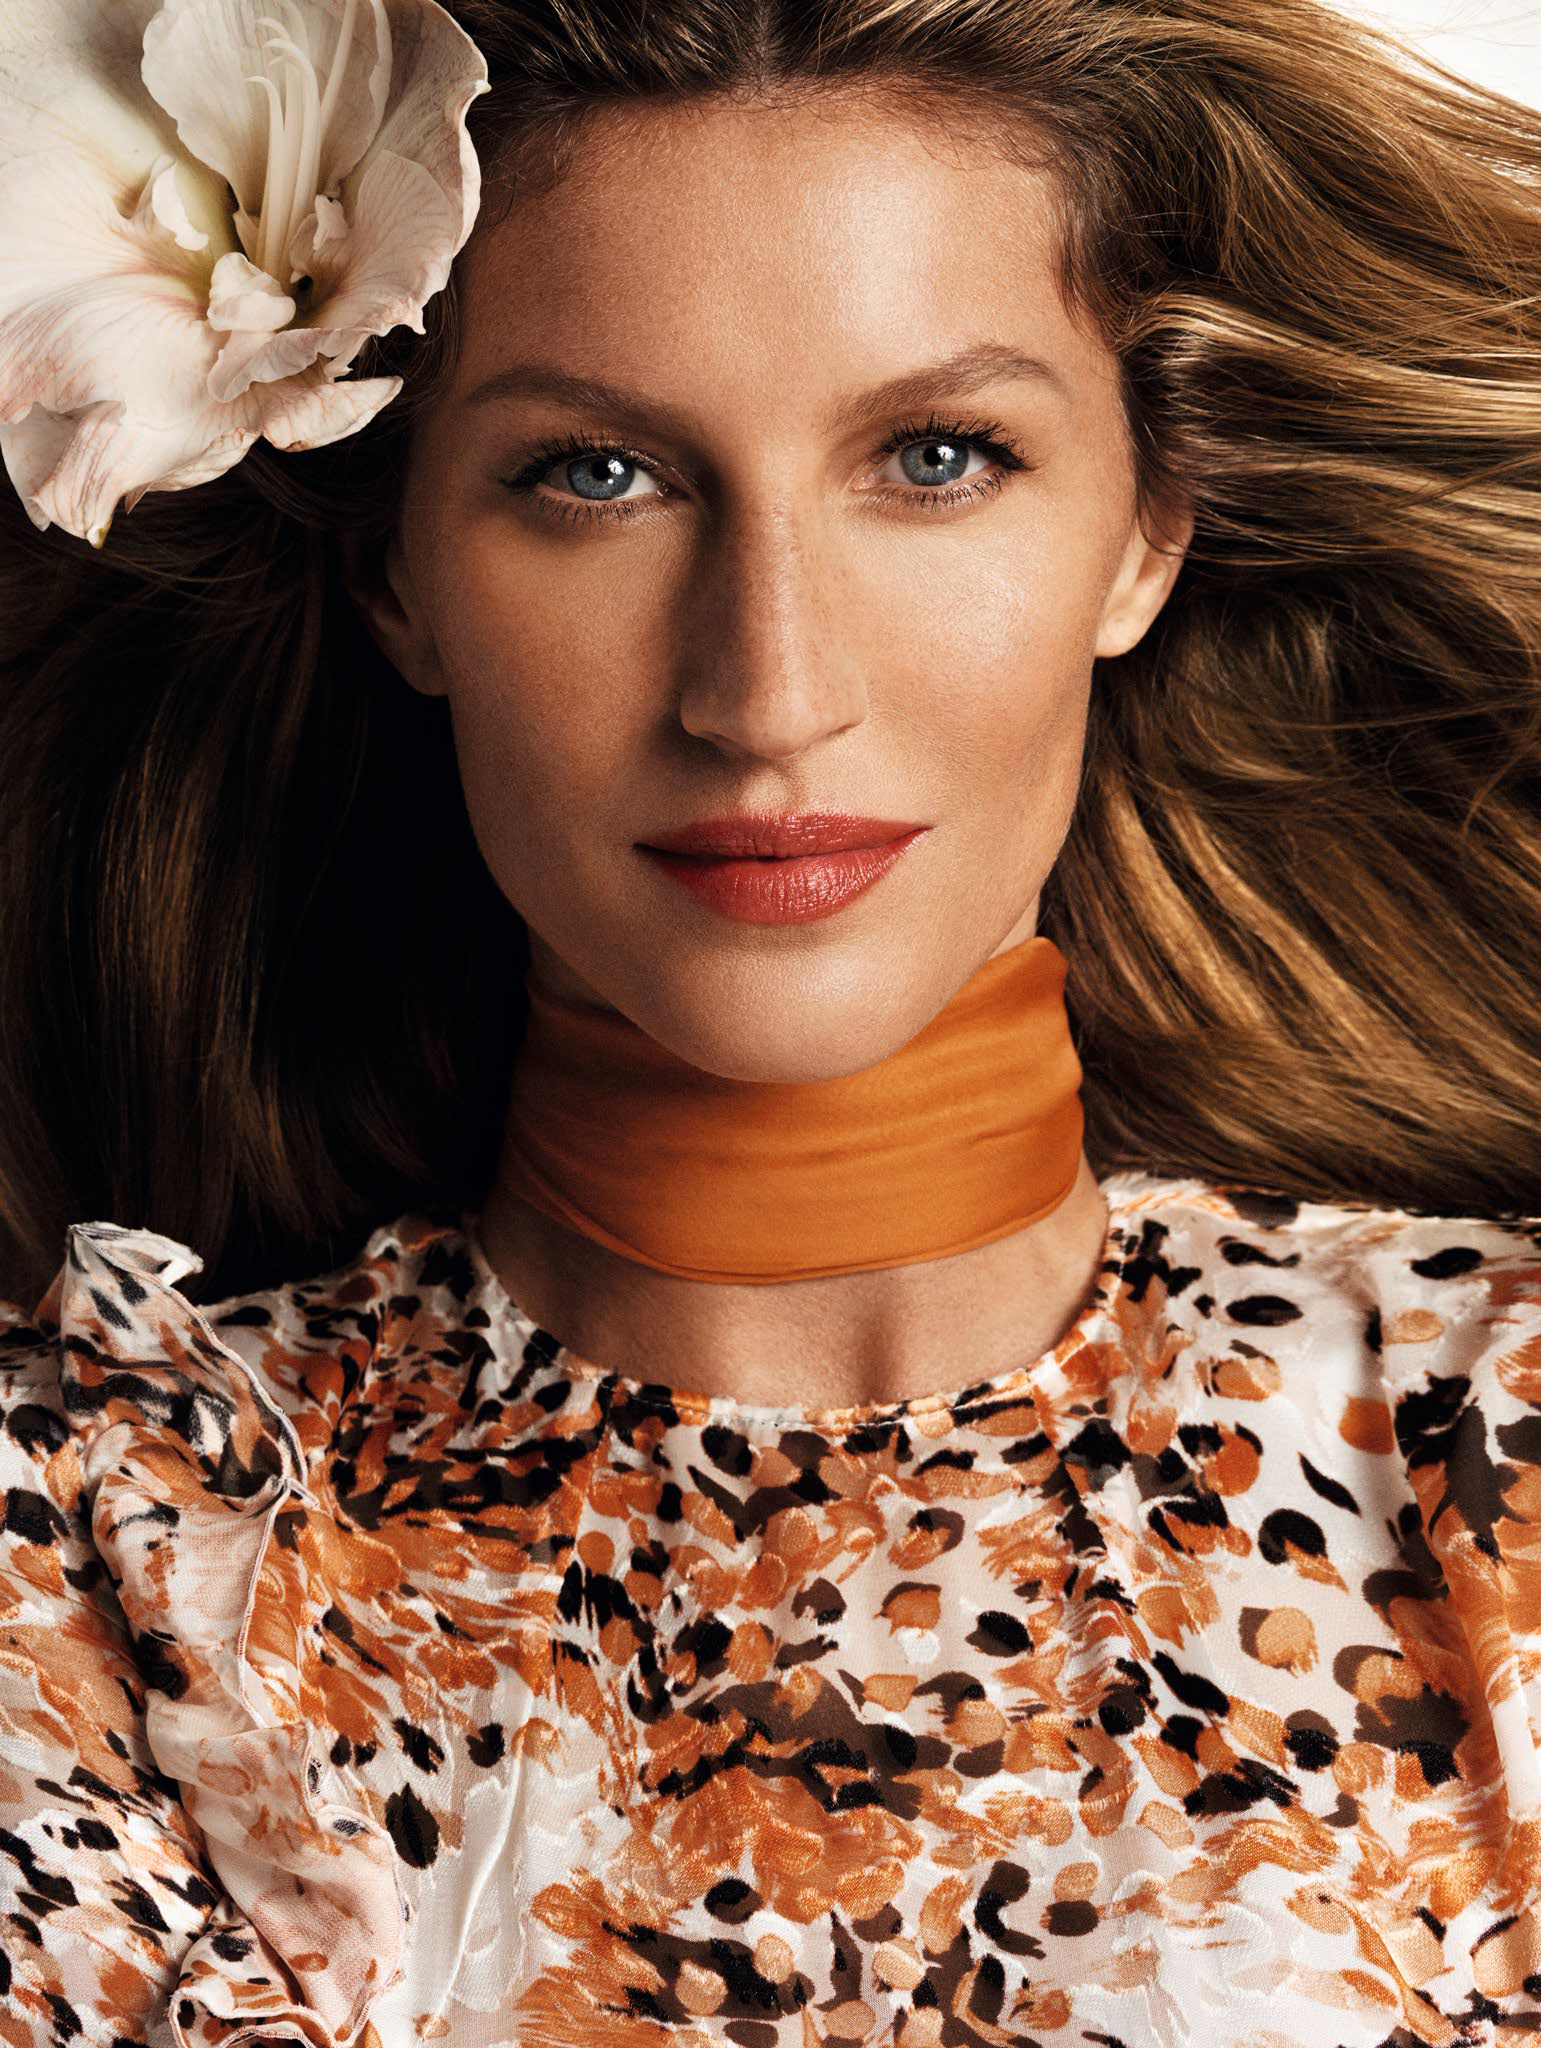 gisele-bc3bcndchen-by-mario-testino-for-vogue-china-march-2015-4